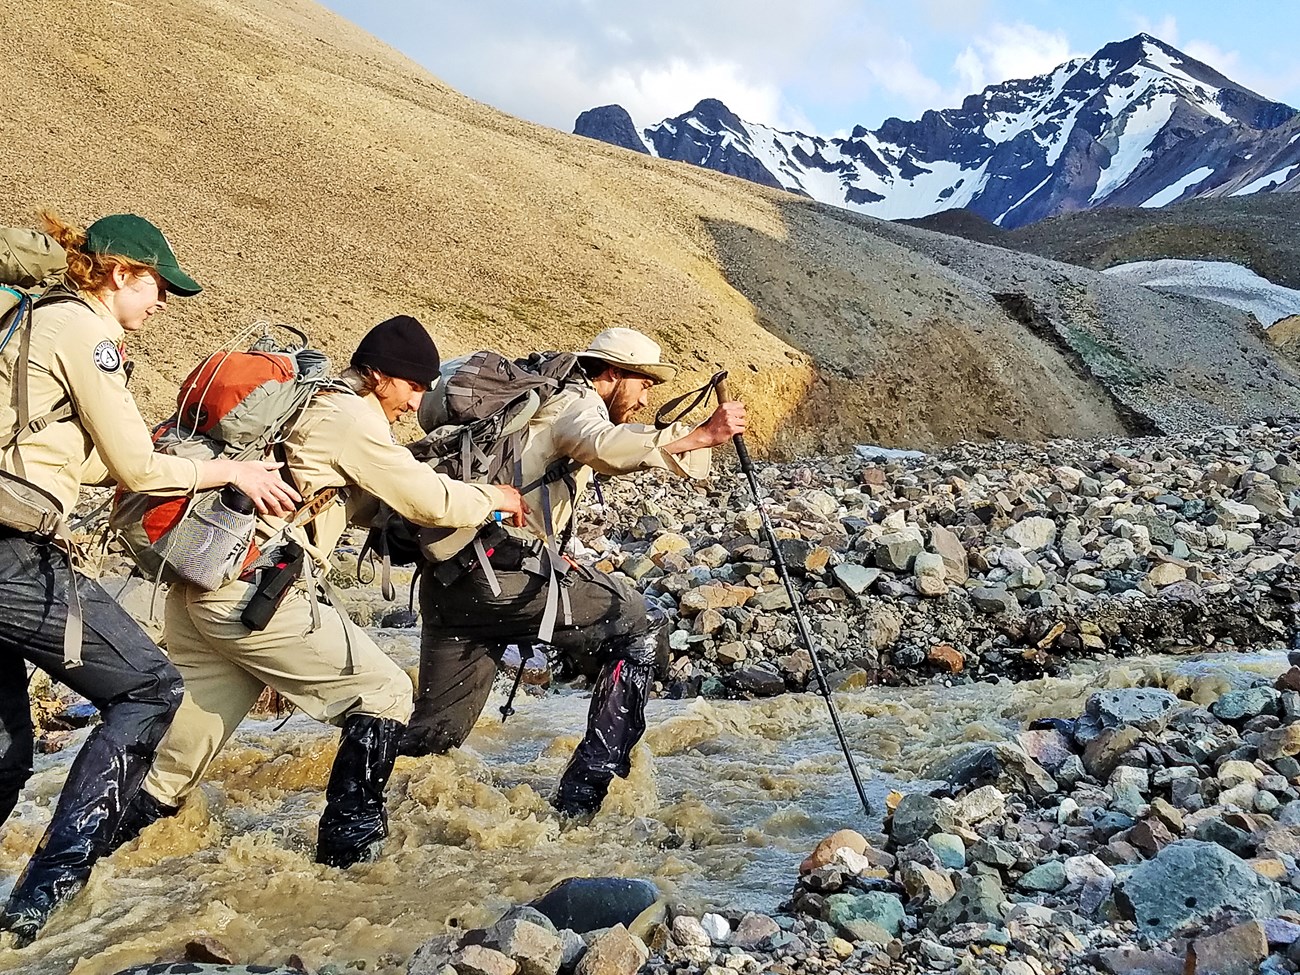 Three people charging across a mountain stream